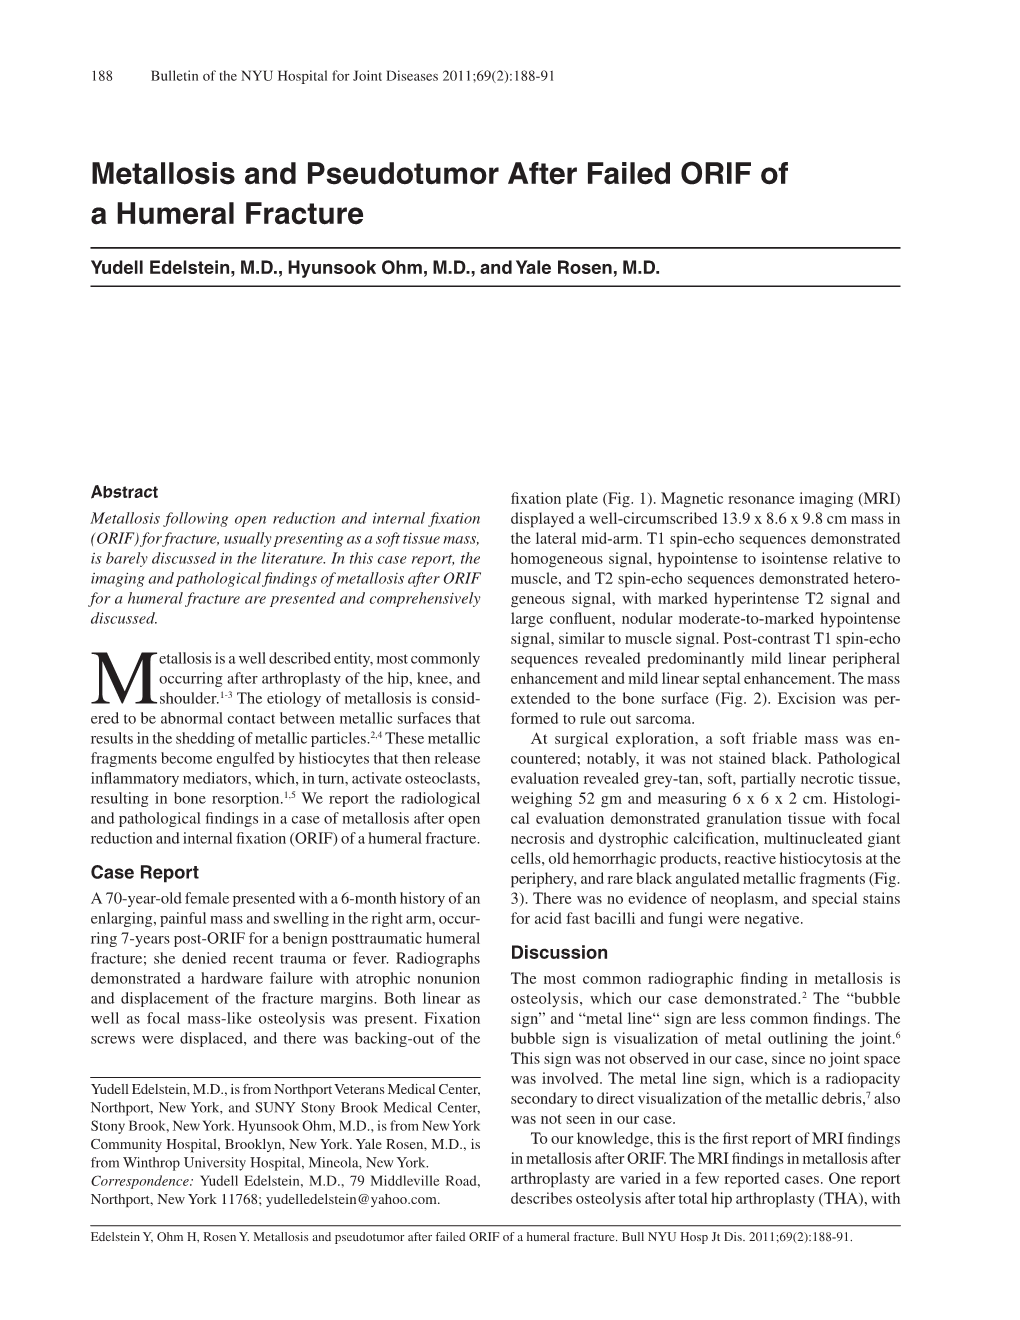 Metallosis and Pseudotumor After Failed ORIF of a Humeral Fracture